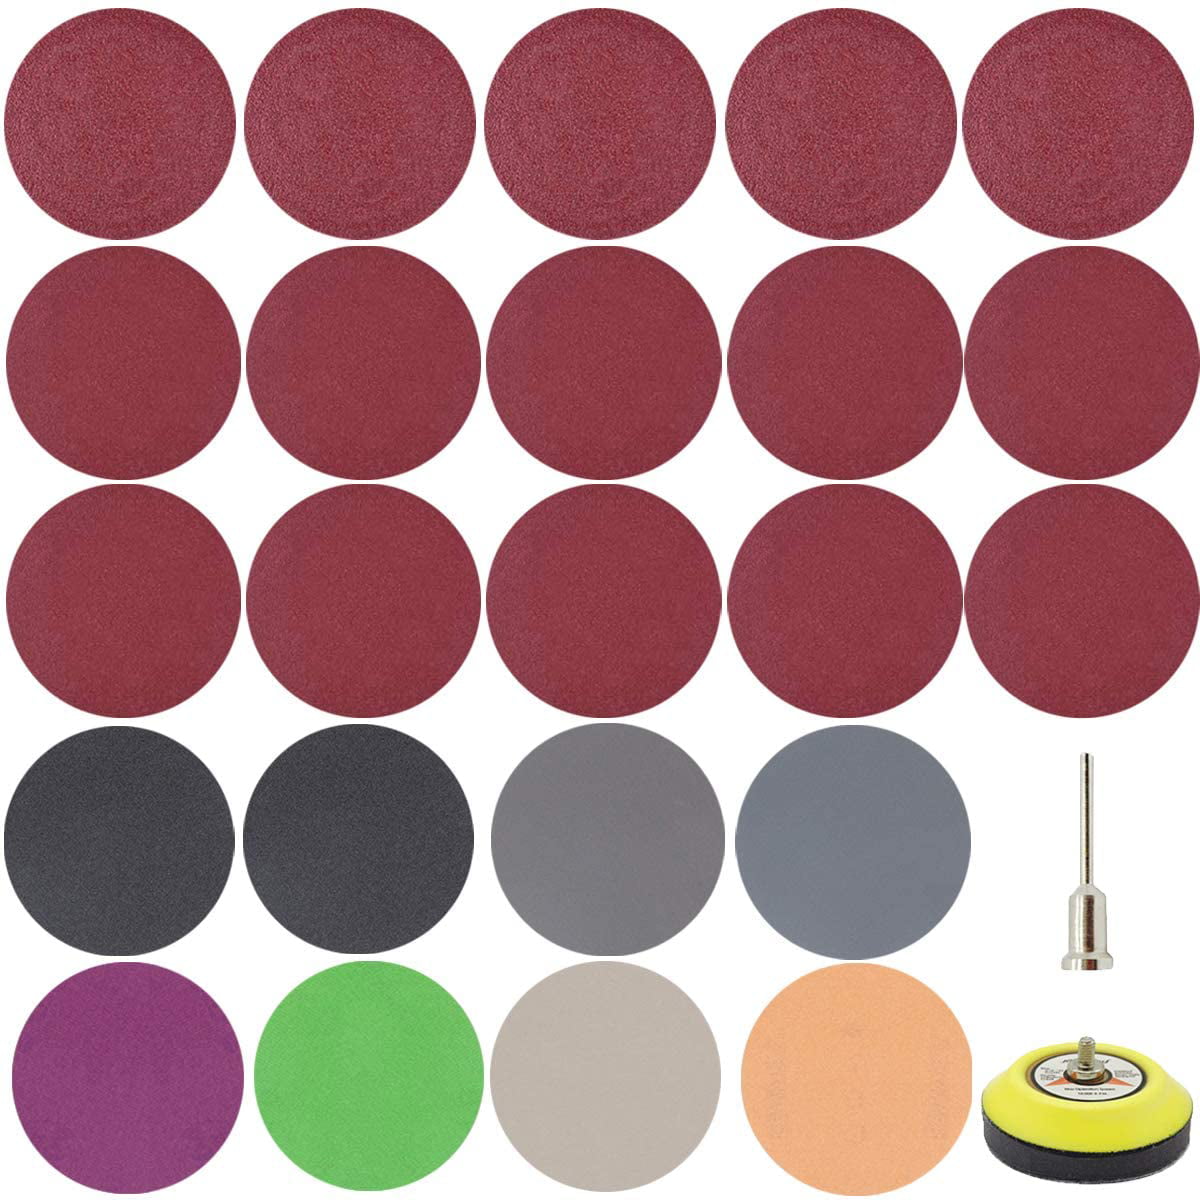 242 Pieces 3 Inch Sanding Discs IONDA Wet Dry Sanding Sheet Backer Plate 1/8 Shank and Soft Foam Buffering Pad 60 to 10000 Grits Grinding Abrasive Sandpaper for Wood Metal Mirror Jewelry Car 